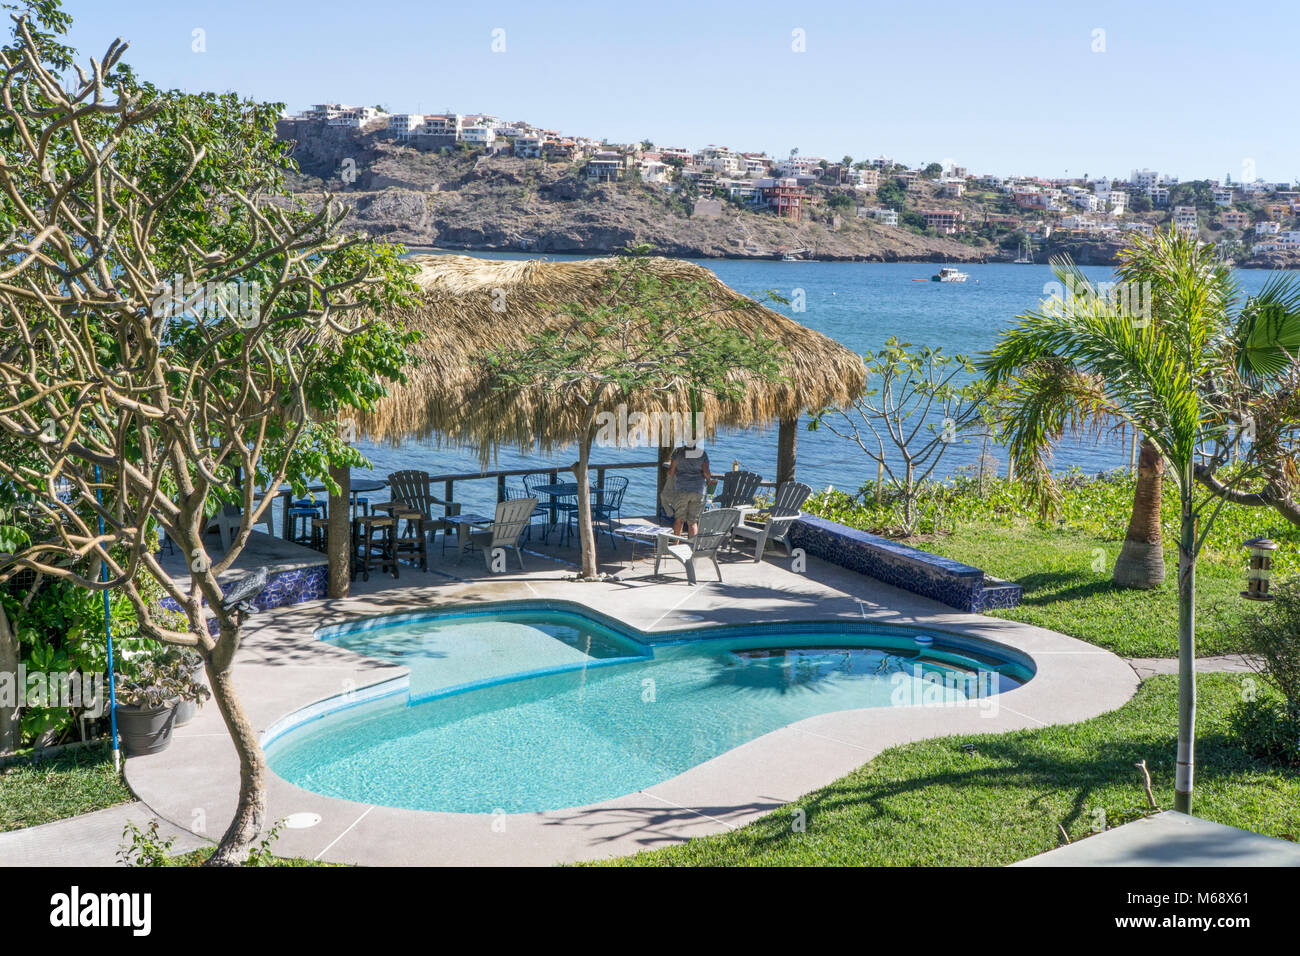 idyllic view Bahia San Carlos from guesthouse with jewel like pool & palapa providing shade for looking out at blue water & gated community across bay Stock Photo